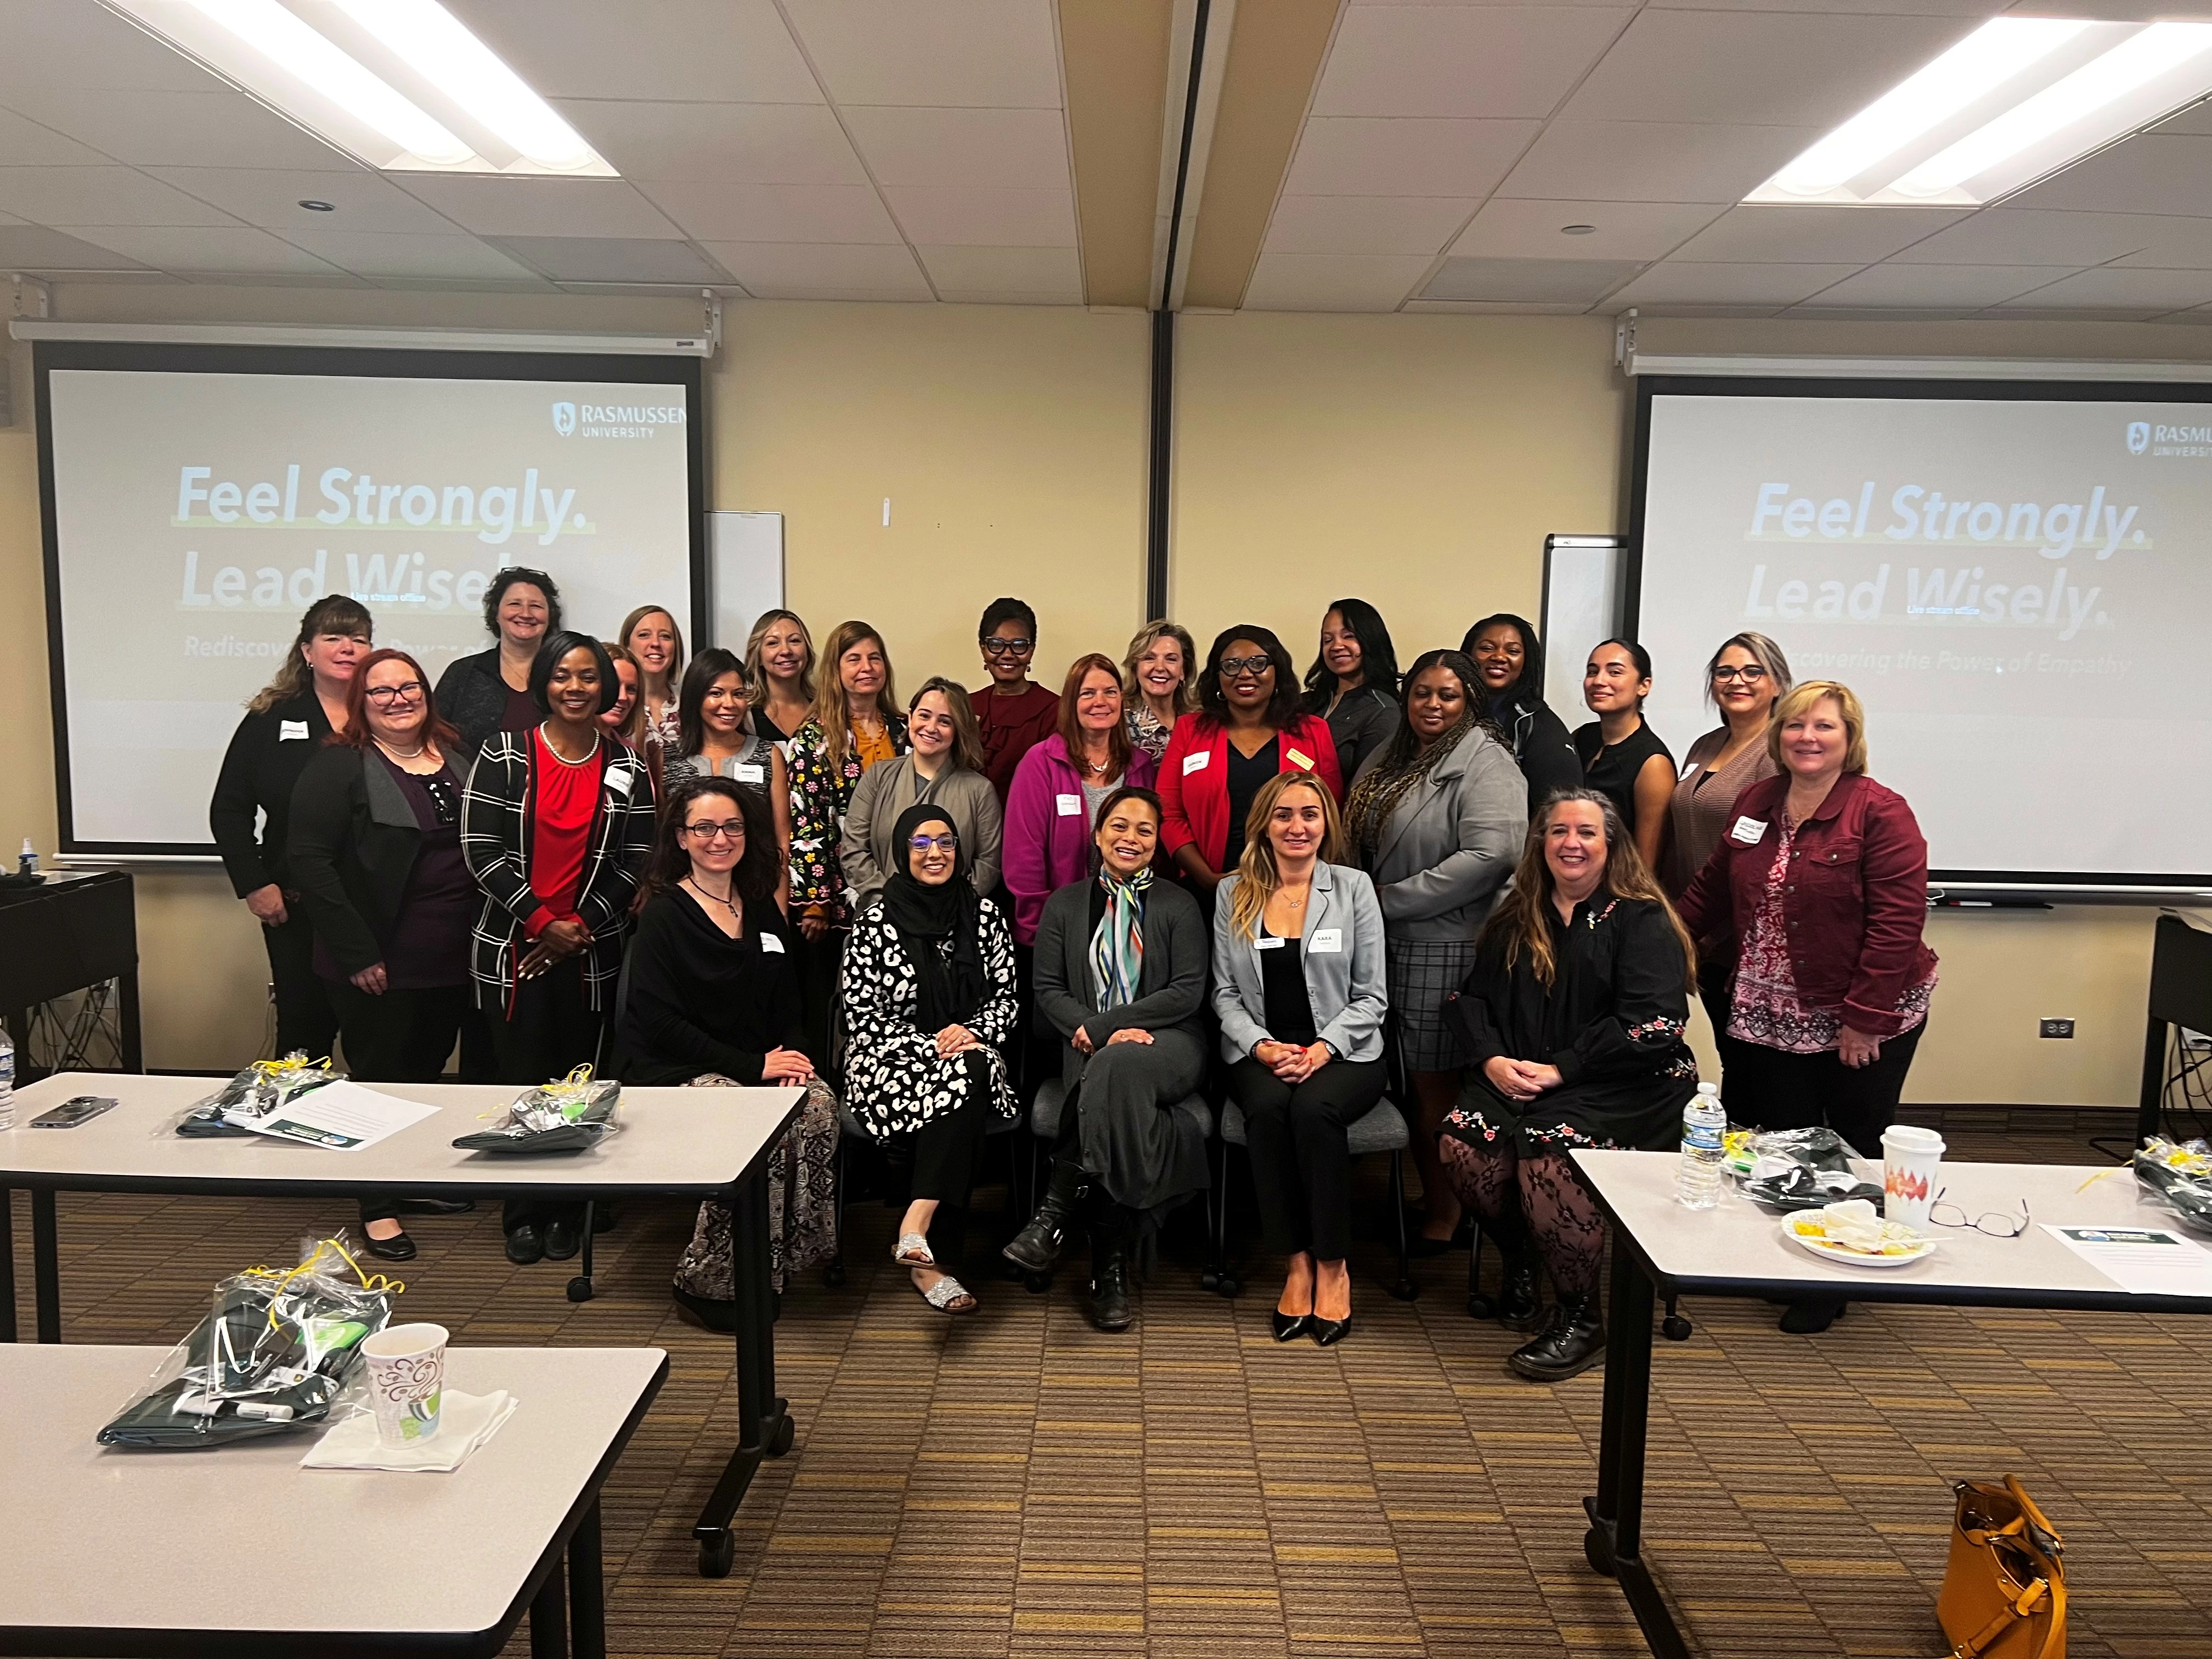 Diversity and Inclusion is a core value for us at Senior Helpers Bolingbrook. We attended the 12th Annual Women's Leadership “Feel Strongly, Lead Wisely “ Session at the Rasmussen University Bolingbrook Area Chamber of Commerce to continually learn from the best at how we can all be even more inclusive to our employees and our clients.